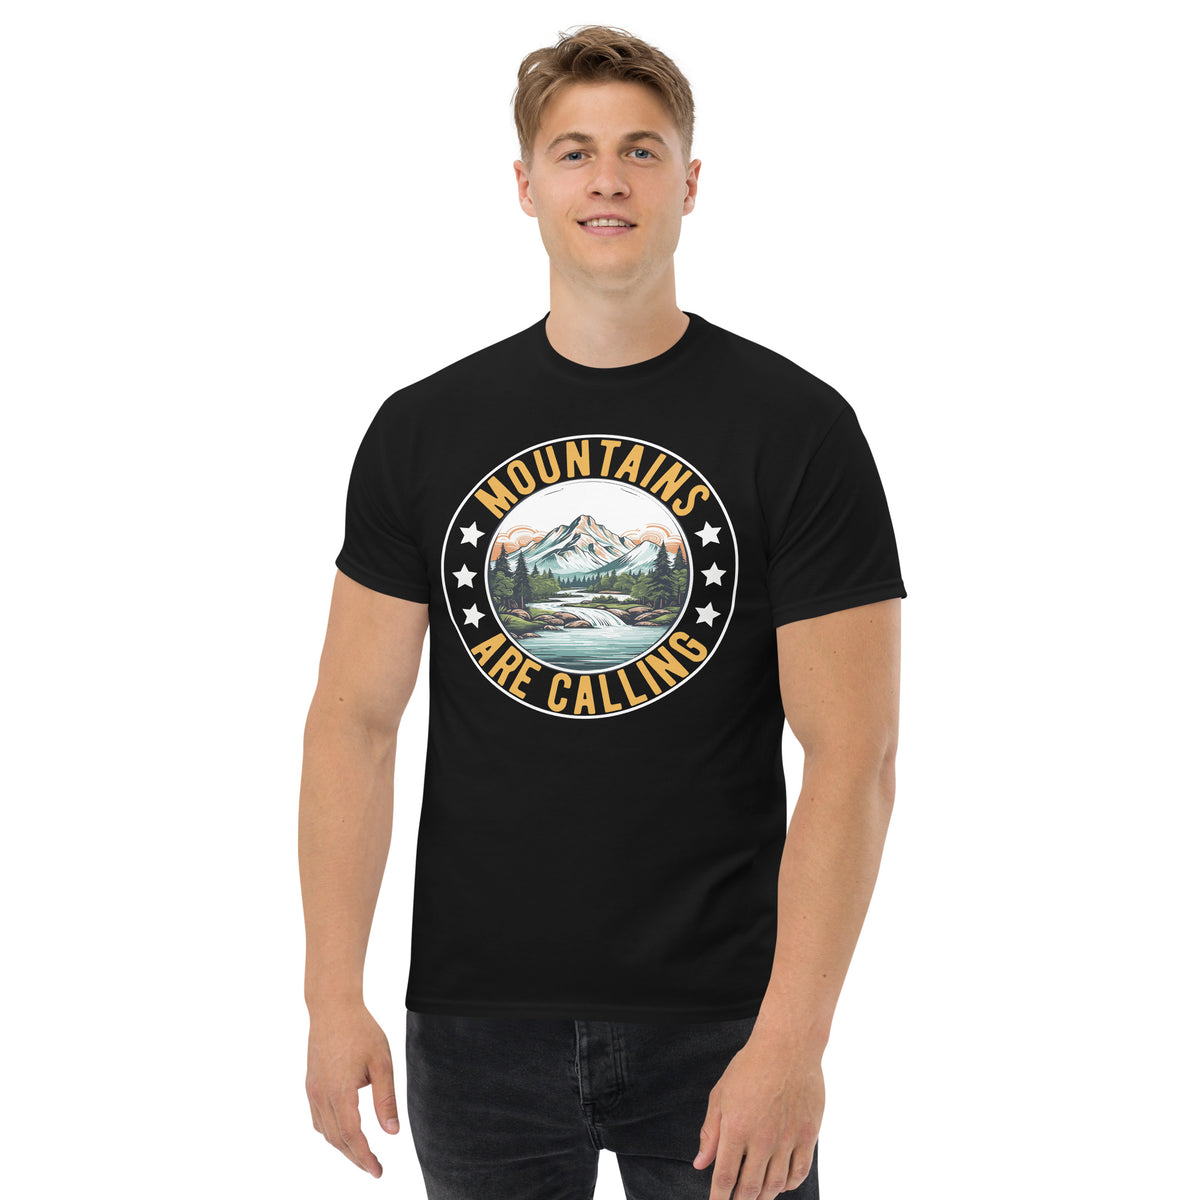 T-Shirt Outdoor & Wandern "Mountains are calling " Variante 2